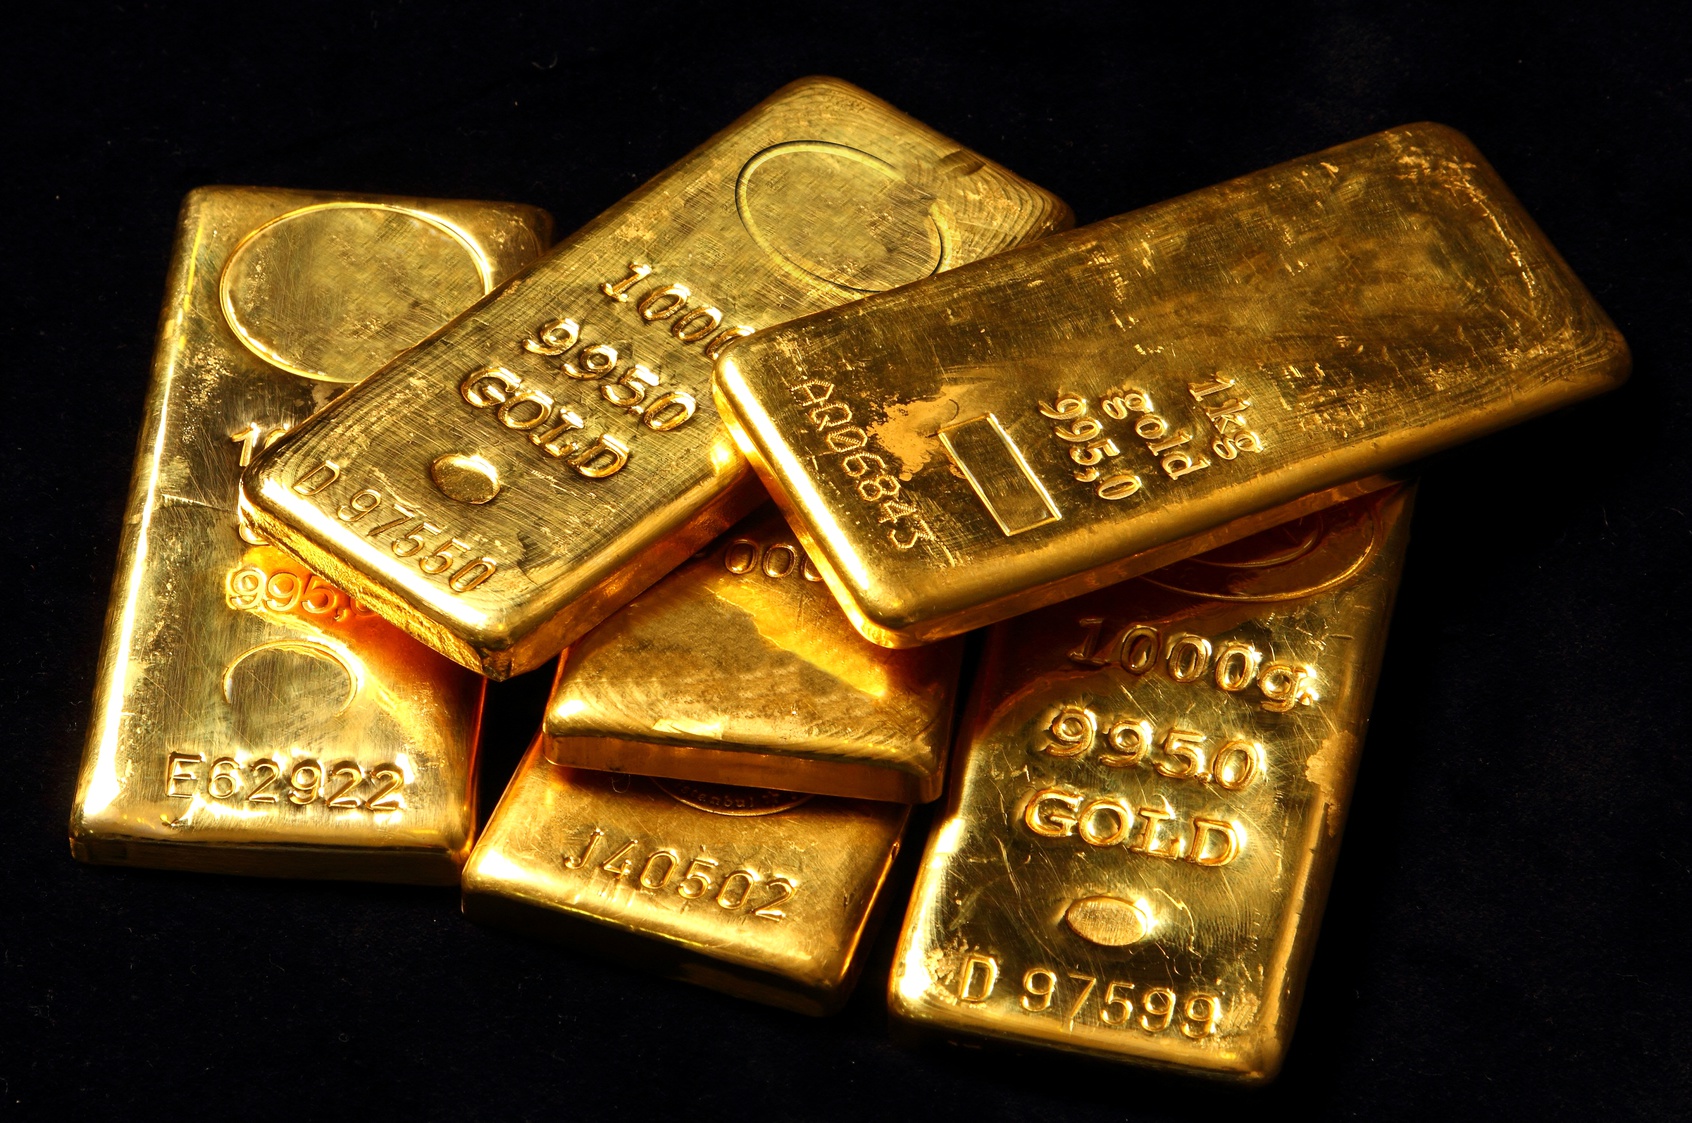 The Secret Central Bank Gold Transfer – Operation Fish